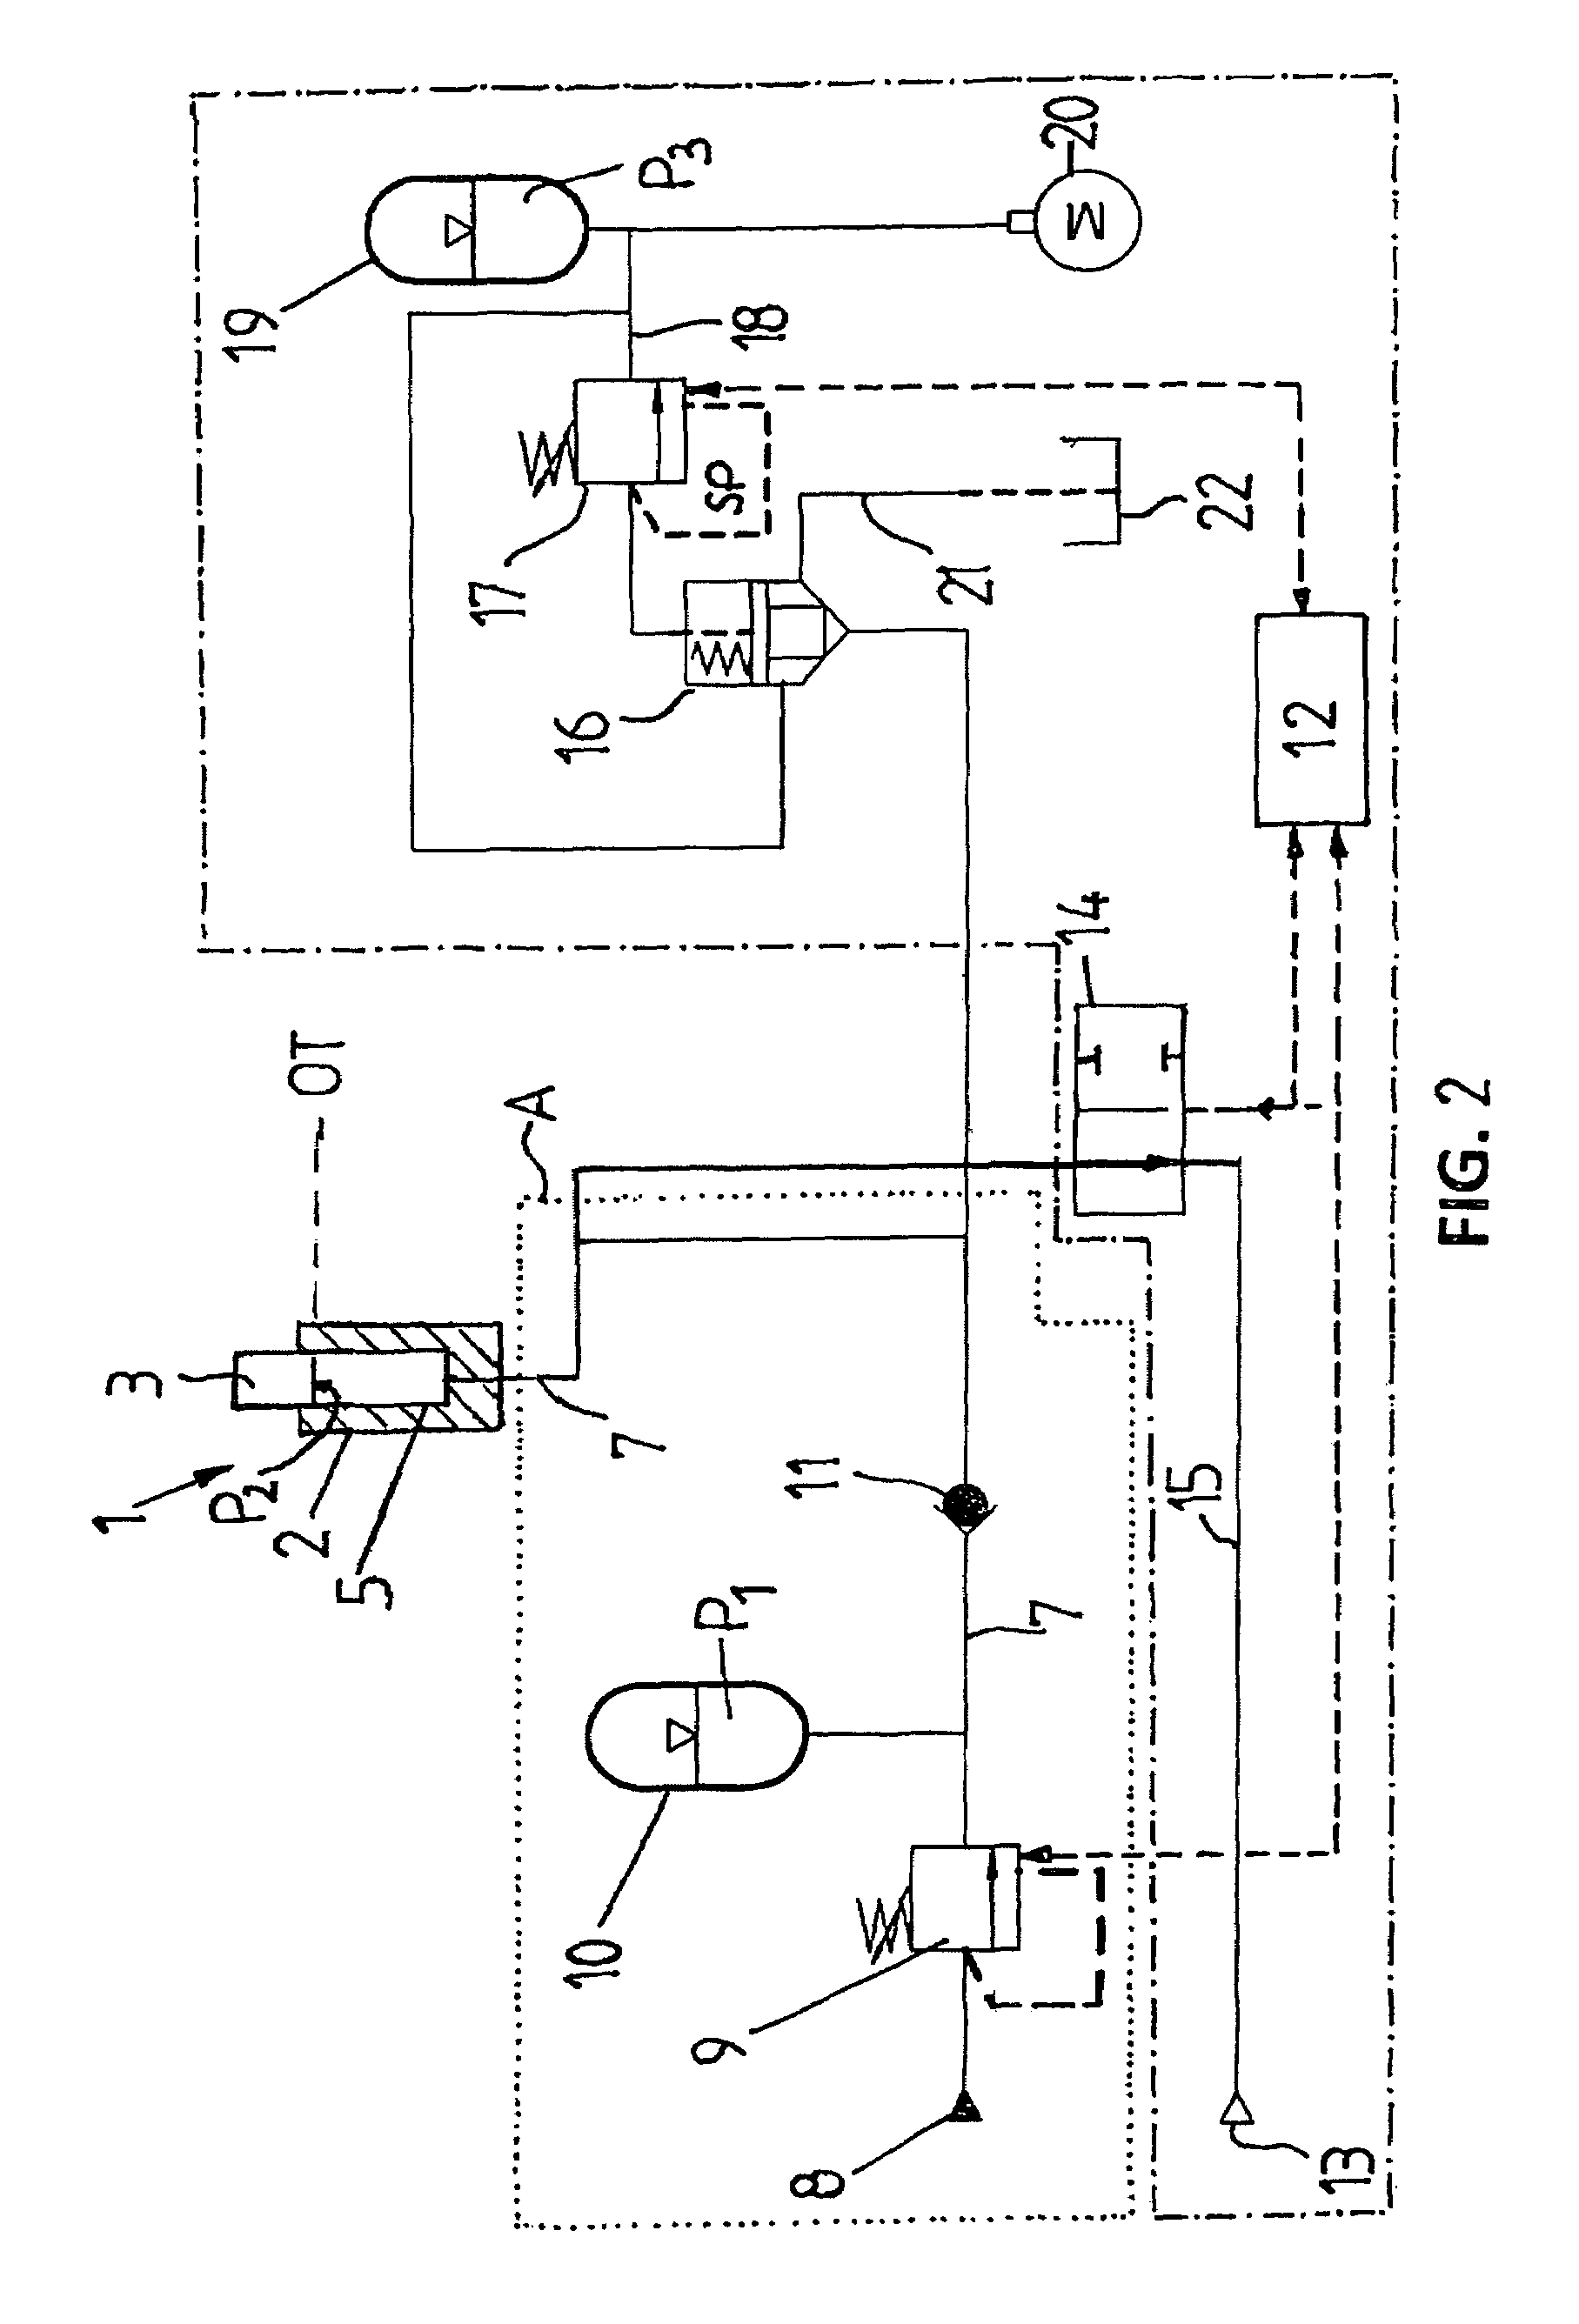 Method and device for controlling the synchronization of cylinder/piston units and for reducing pressure peaks during forming and/or fineblanking on a fineblanking or stamping press